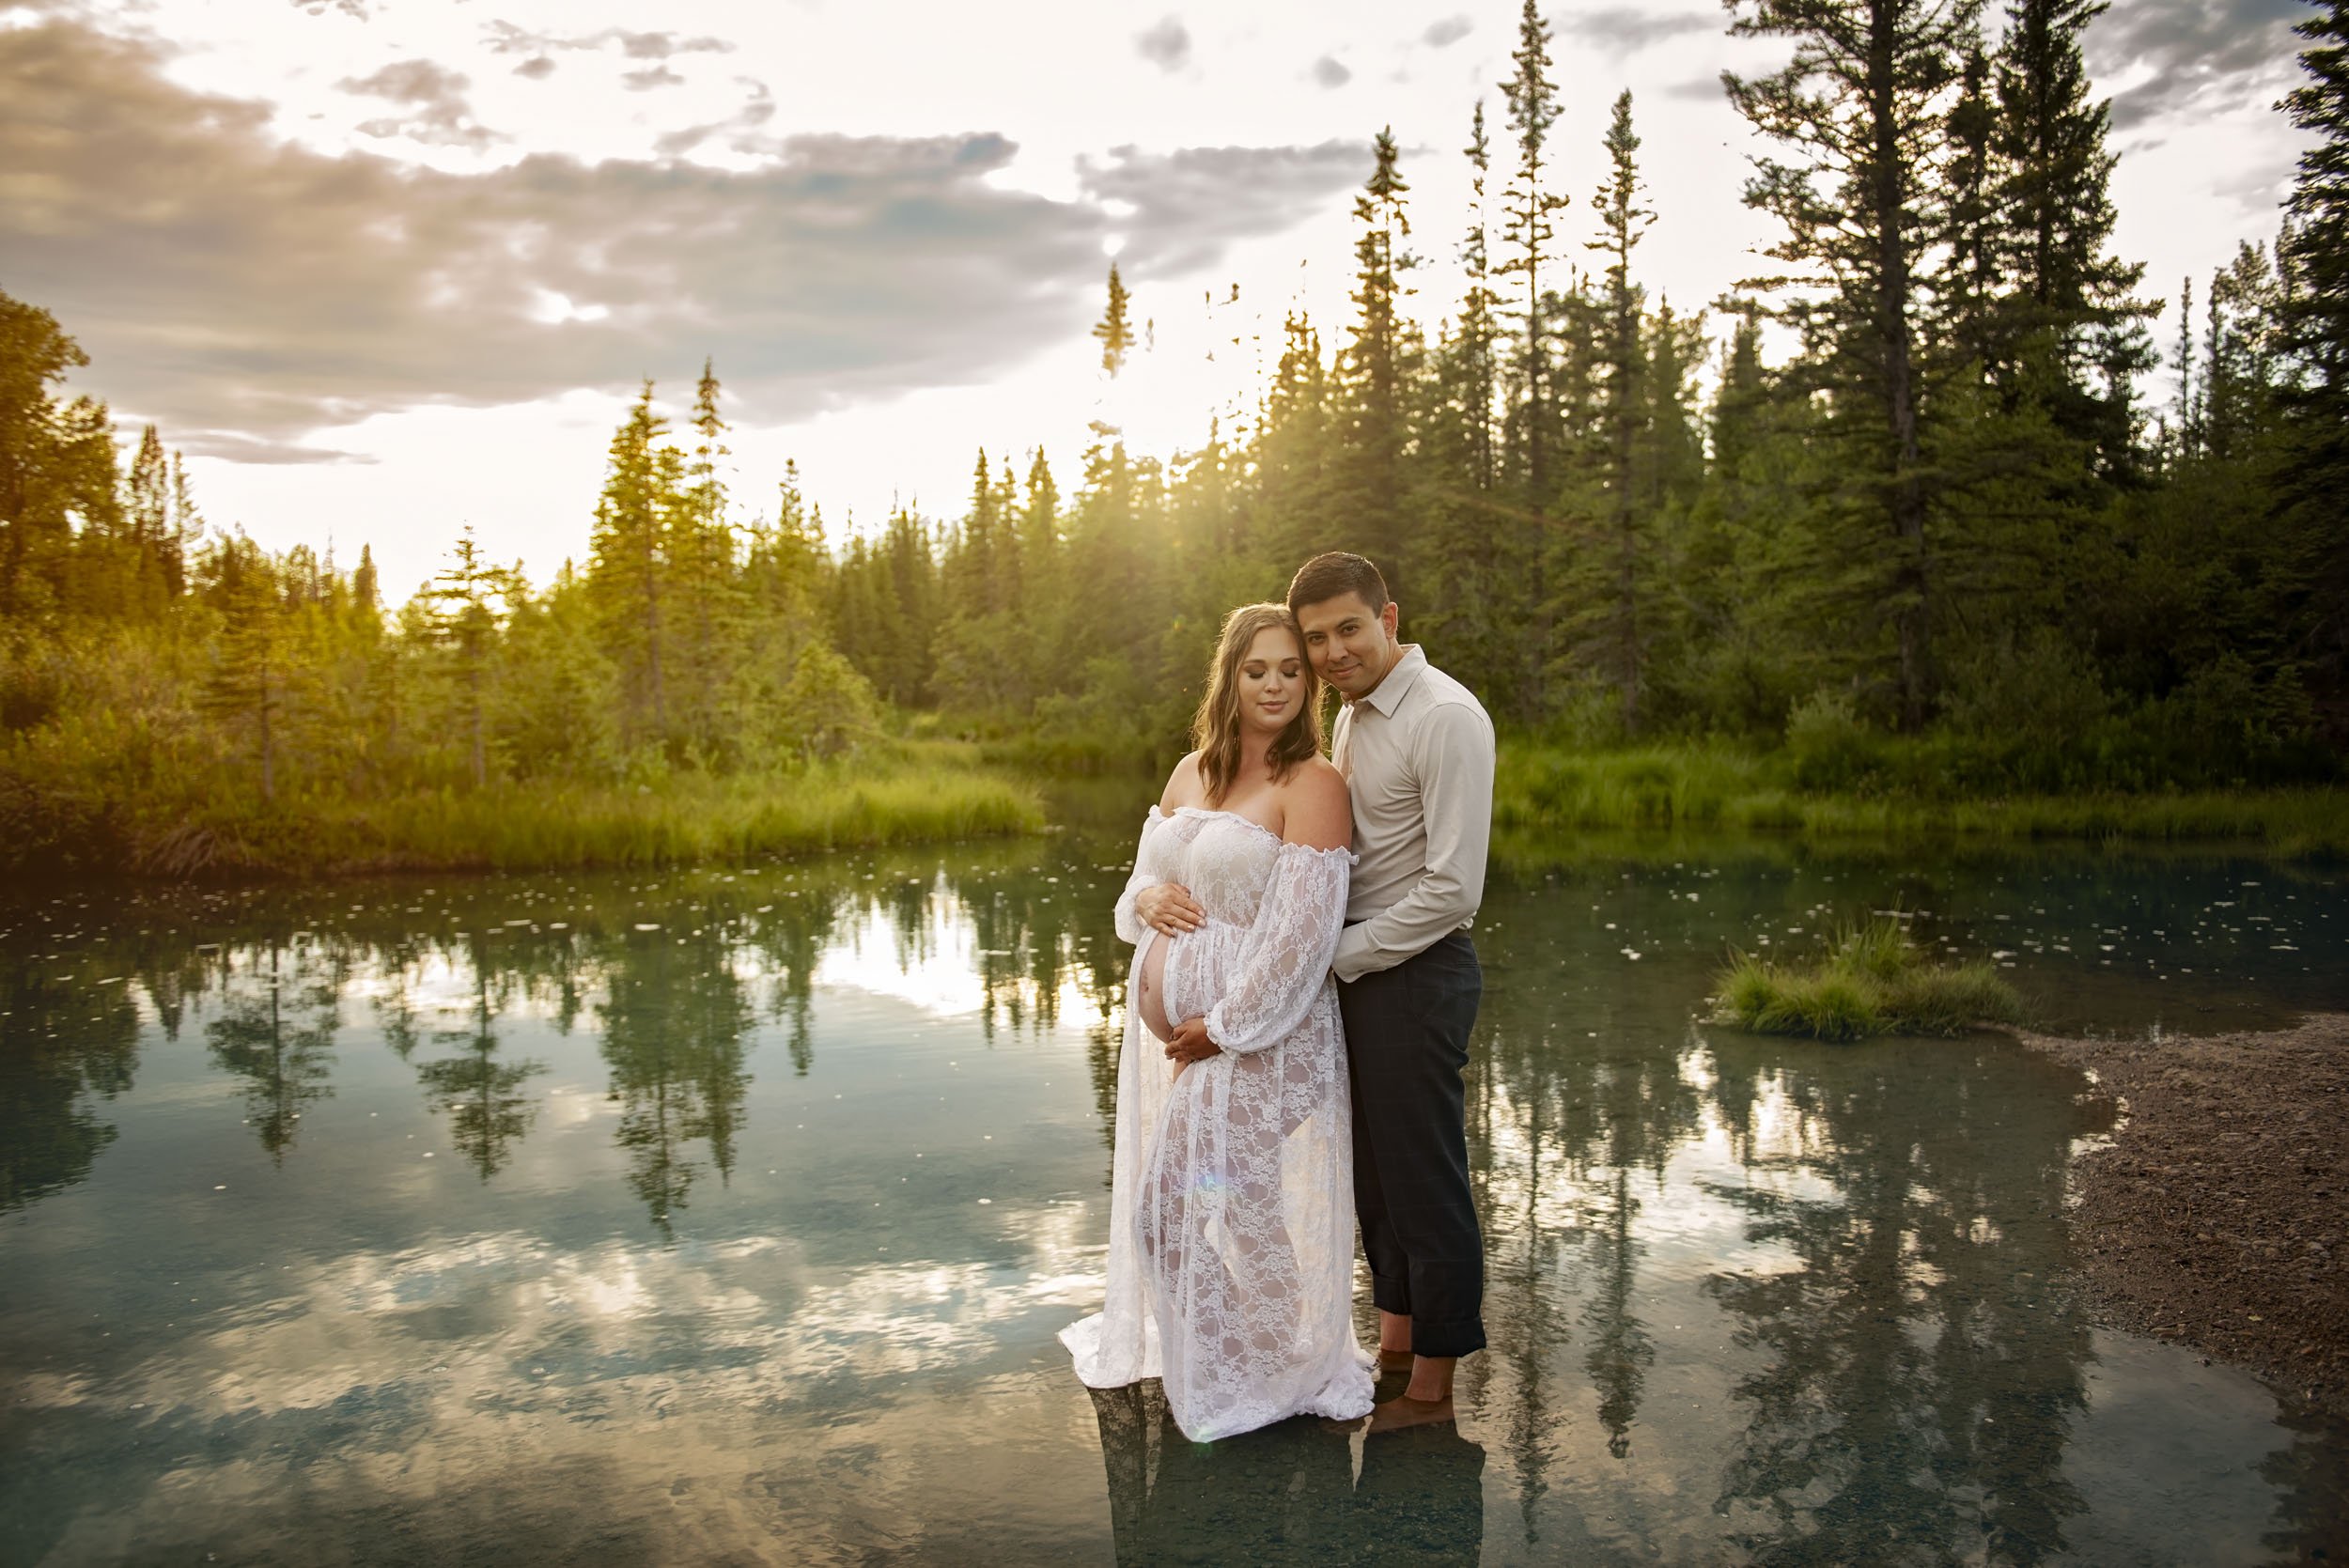 Lace and locket photo Airdrie Calgary Maternity Photographer-37.jpg